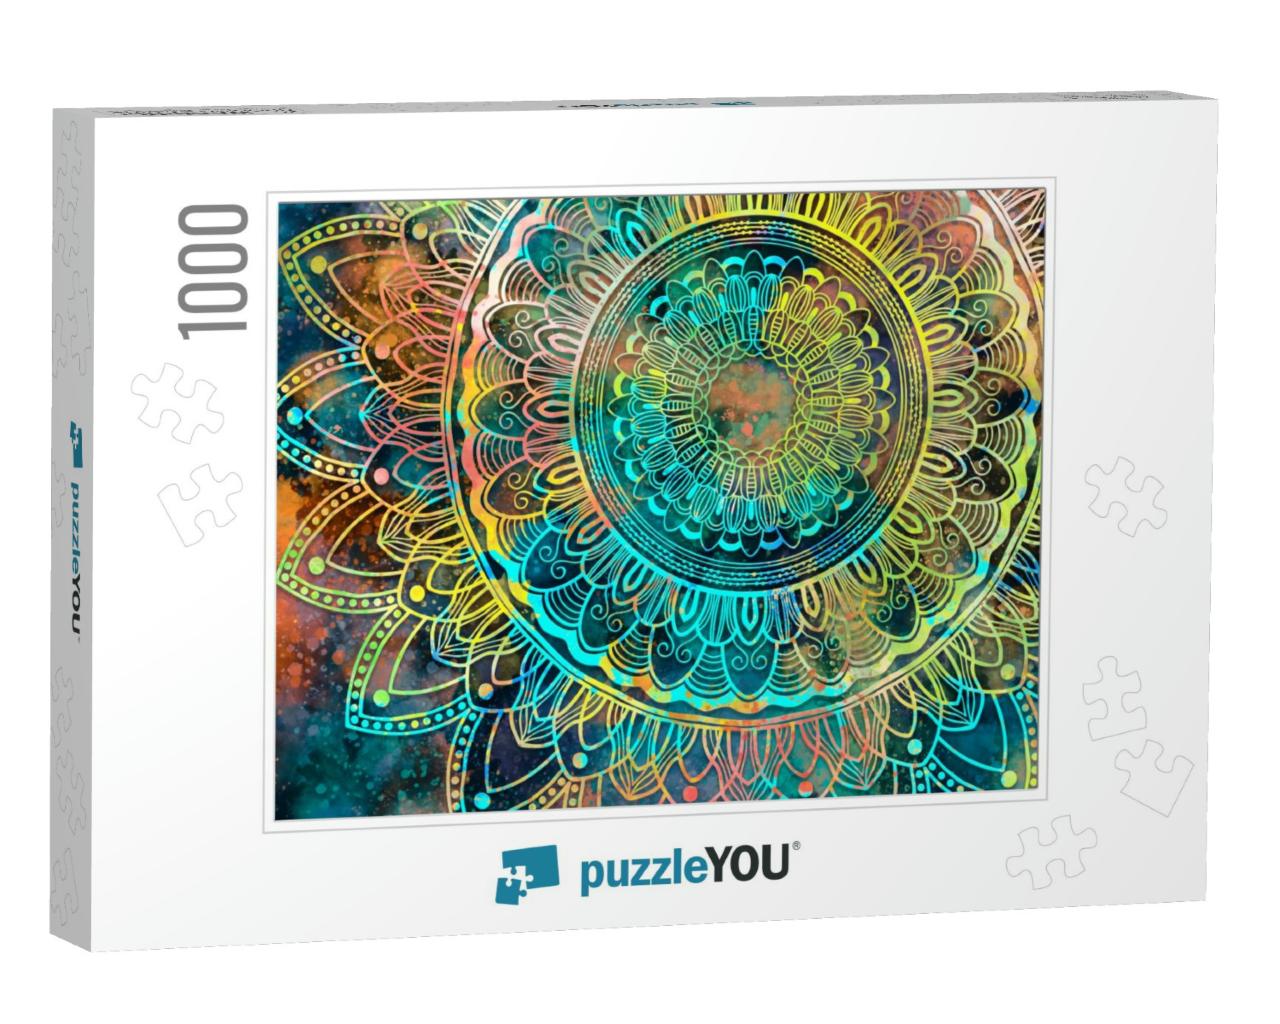 Abstract Mandala Graphic Design & Watercolor Digital Art... Jigsaw Puzzle with 1000 pieces